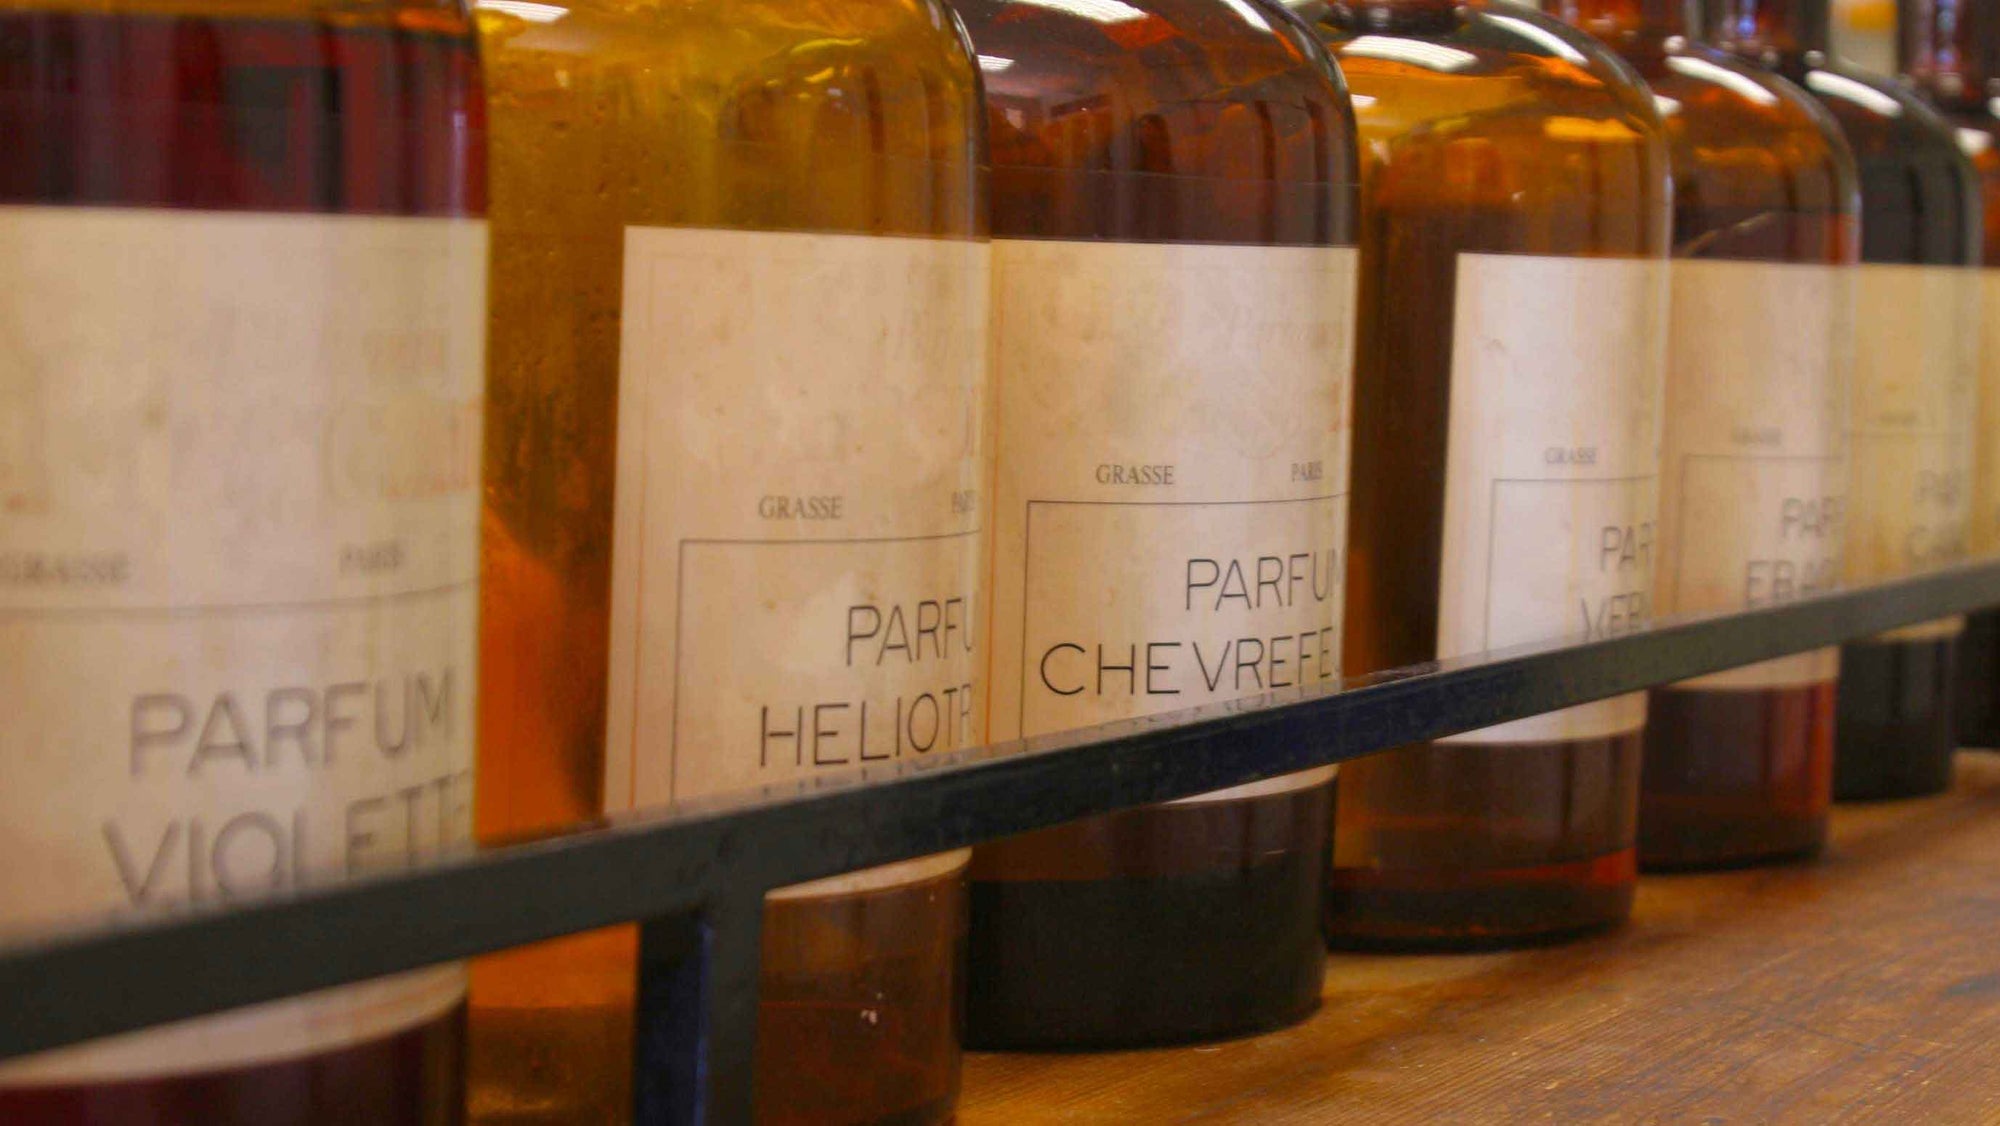 brown fragrance bottles on shelf with french names and labels